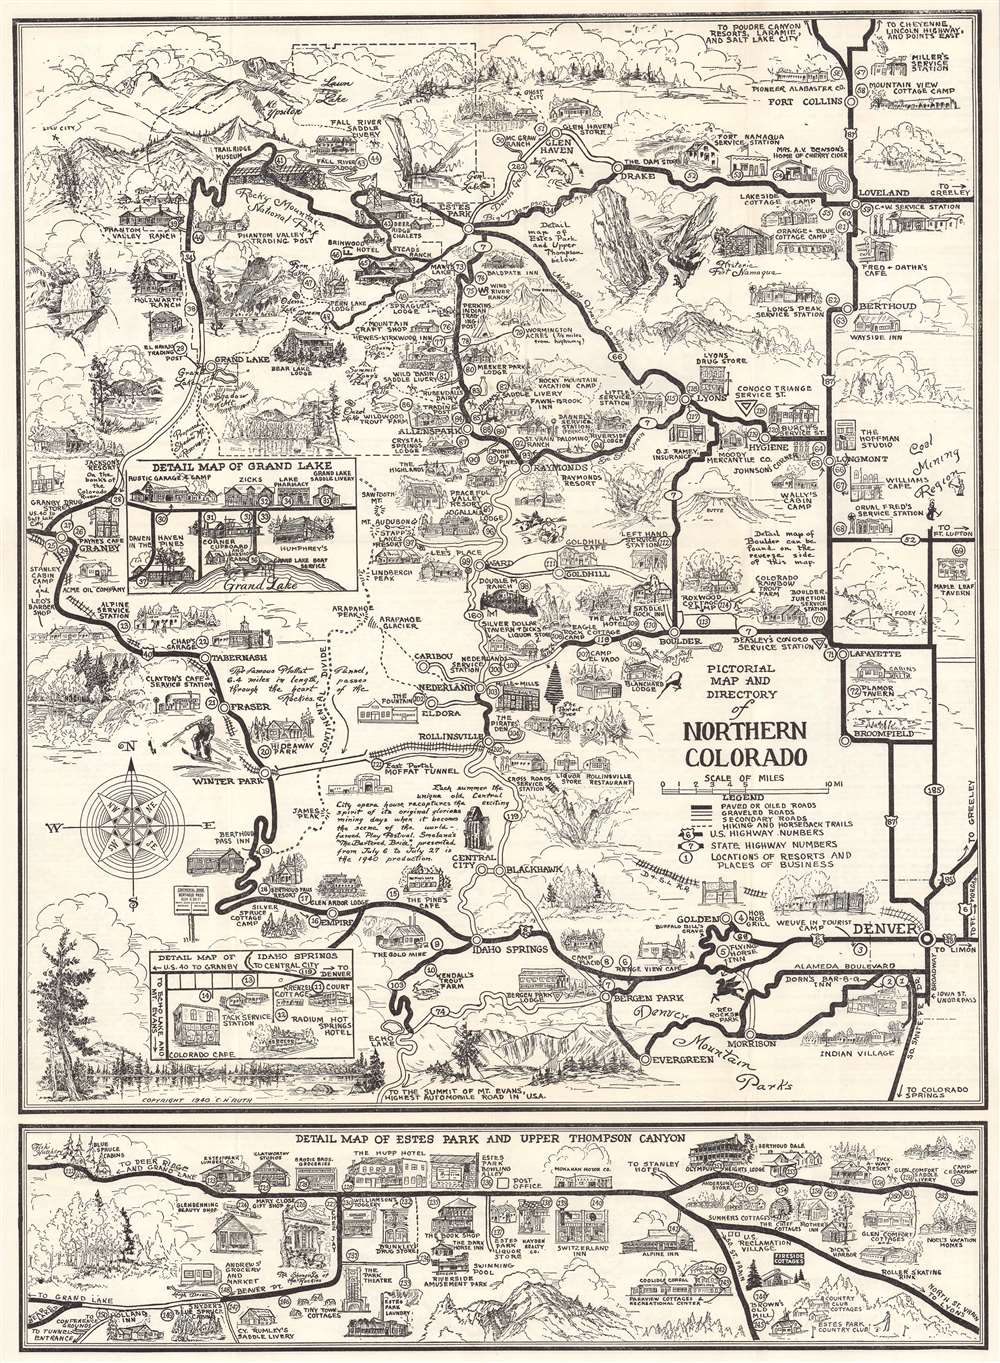 Pictorial Map of the Rocky Mountain National Park Area and Northern Colorado. - Main View